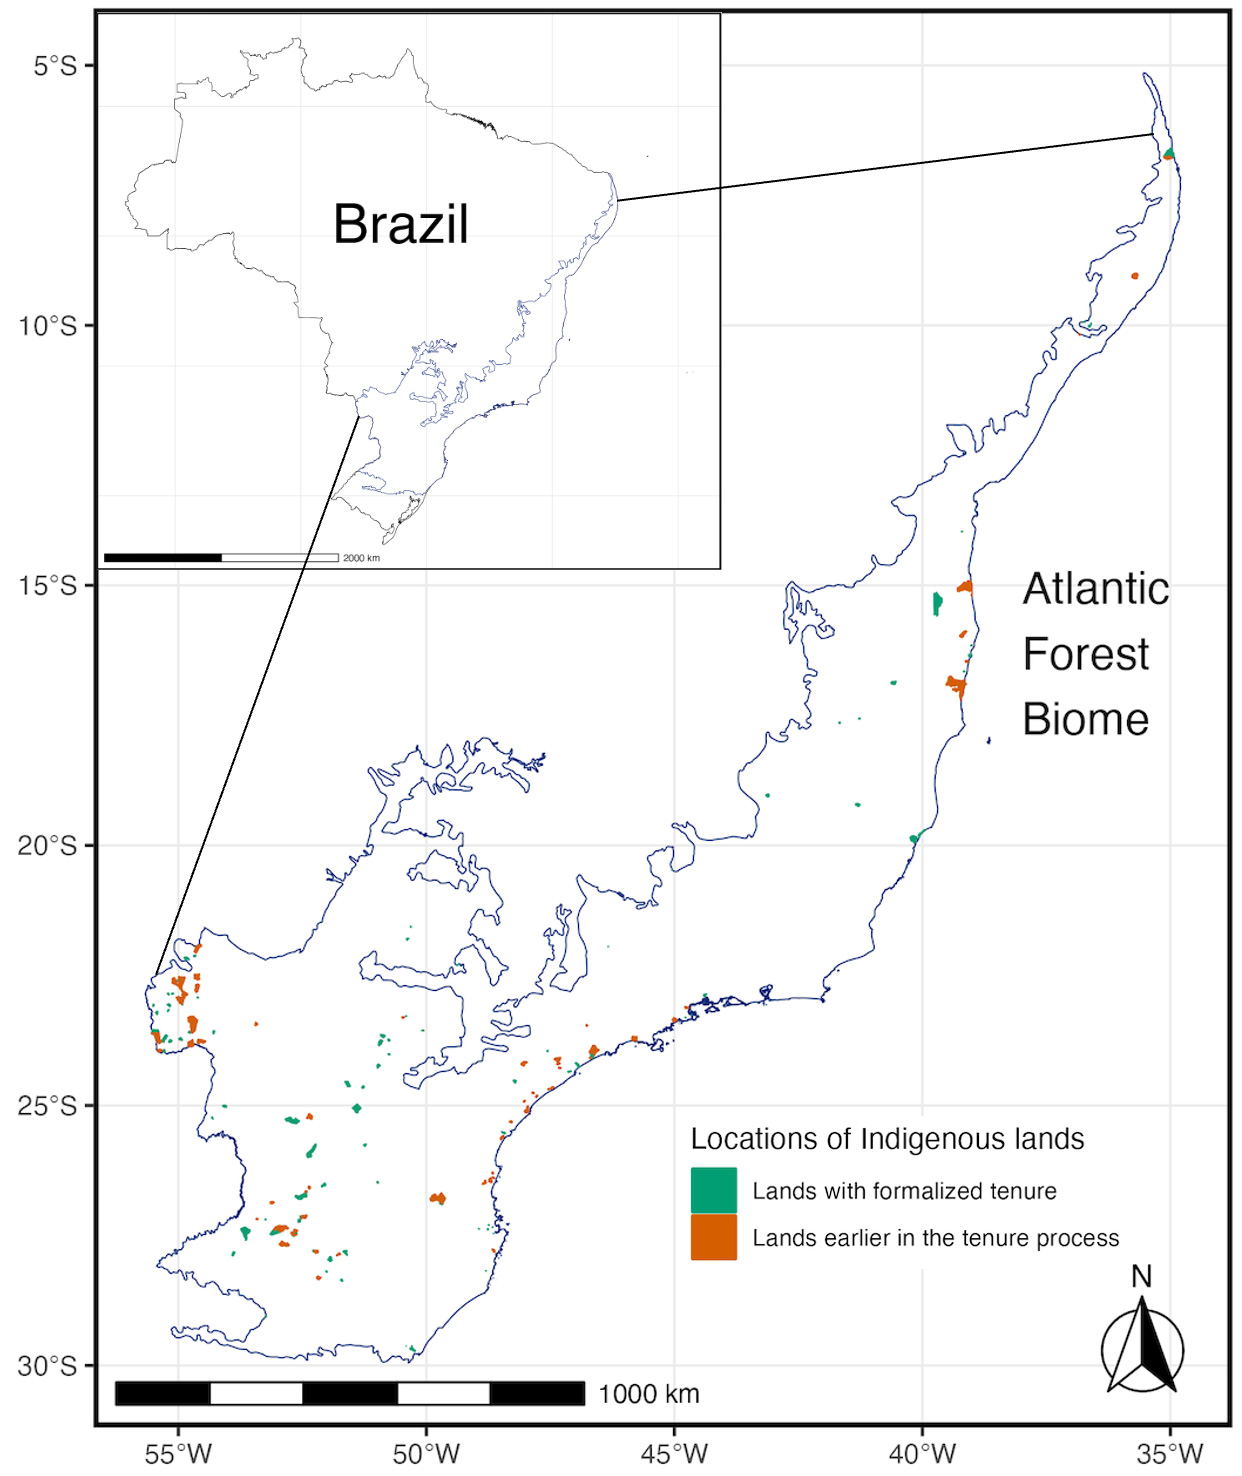 A map showing Indigenous lands in Brazil's Atlantic Forest Biome